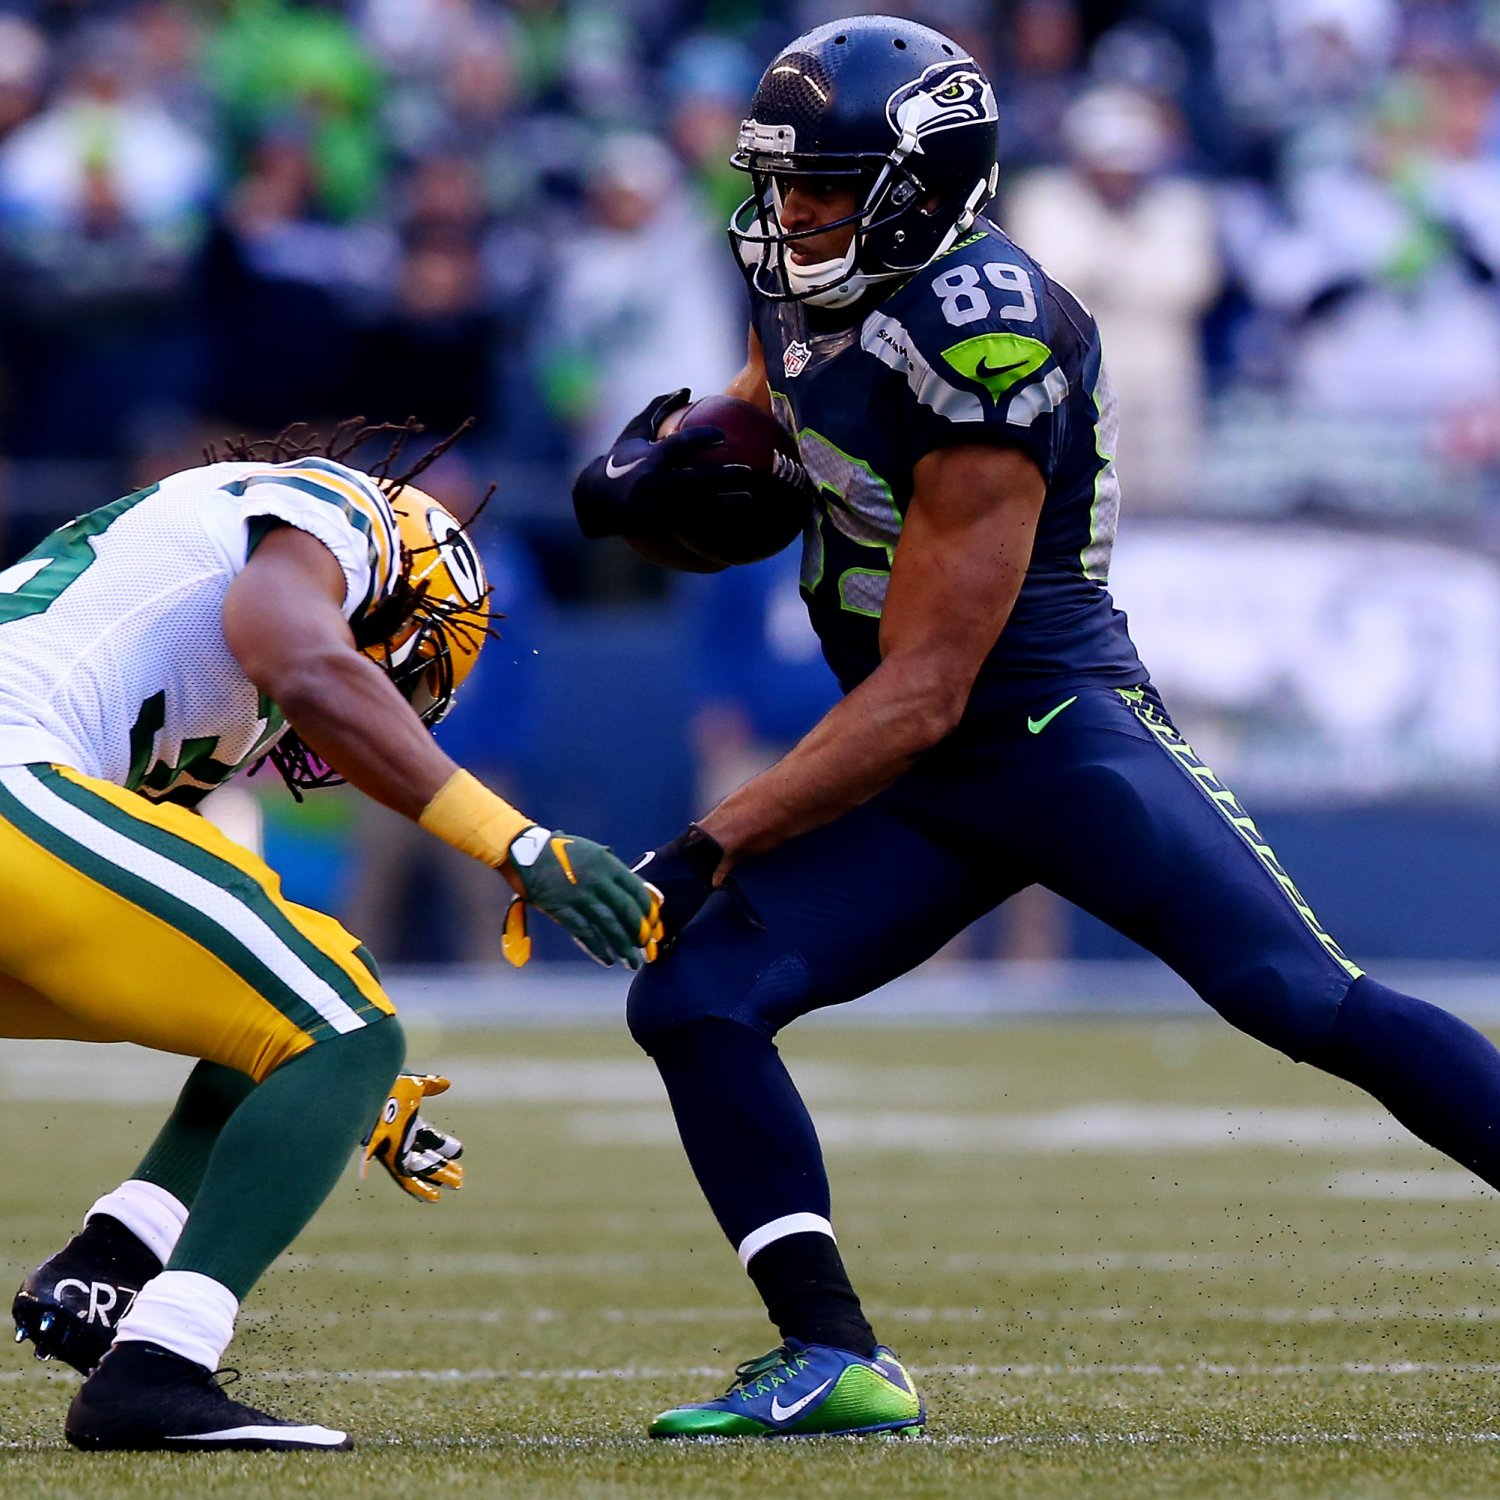 Seattle Seahawks vs. Green Bay Packers Live Score, Highlights and